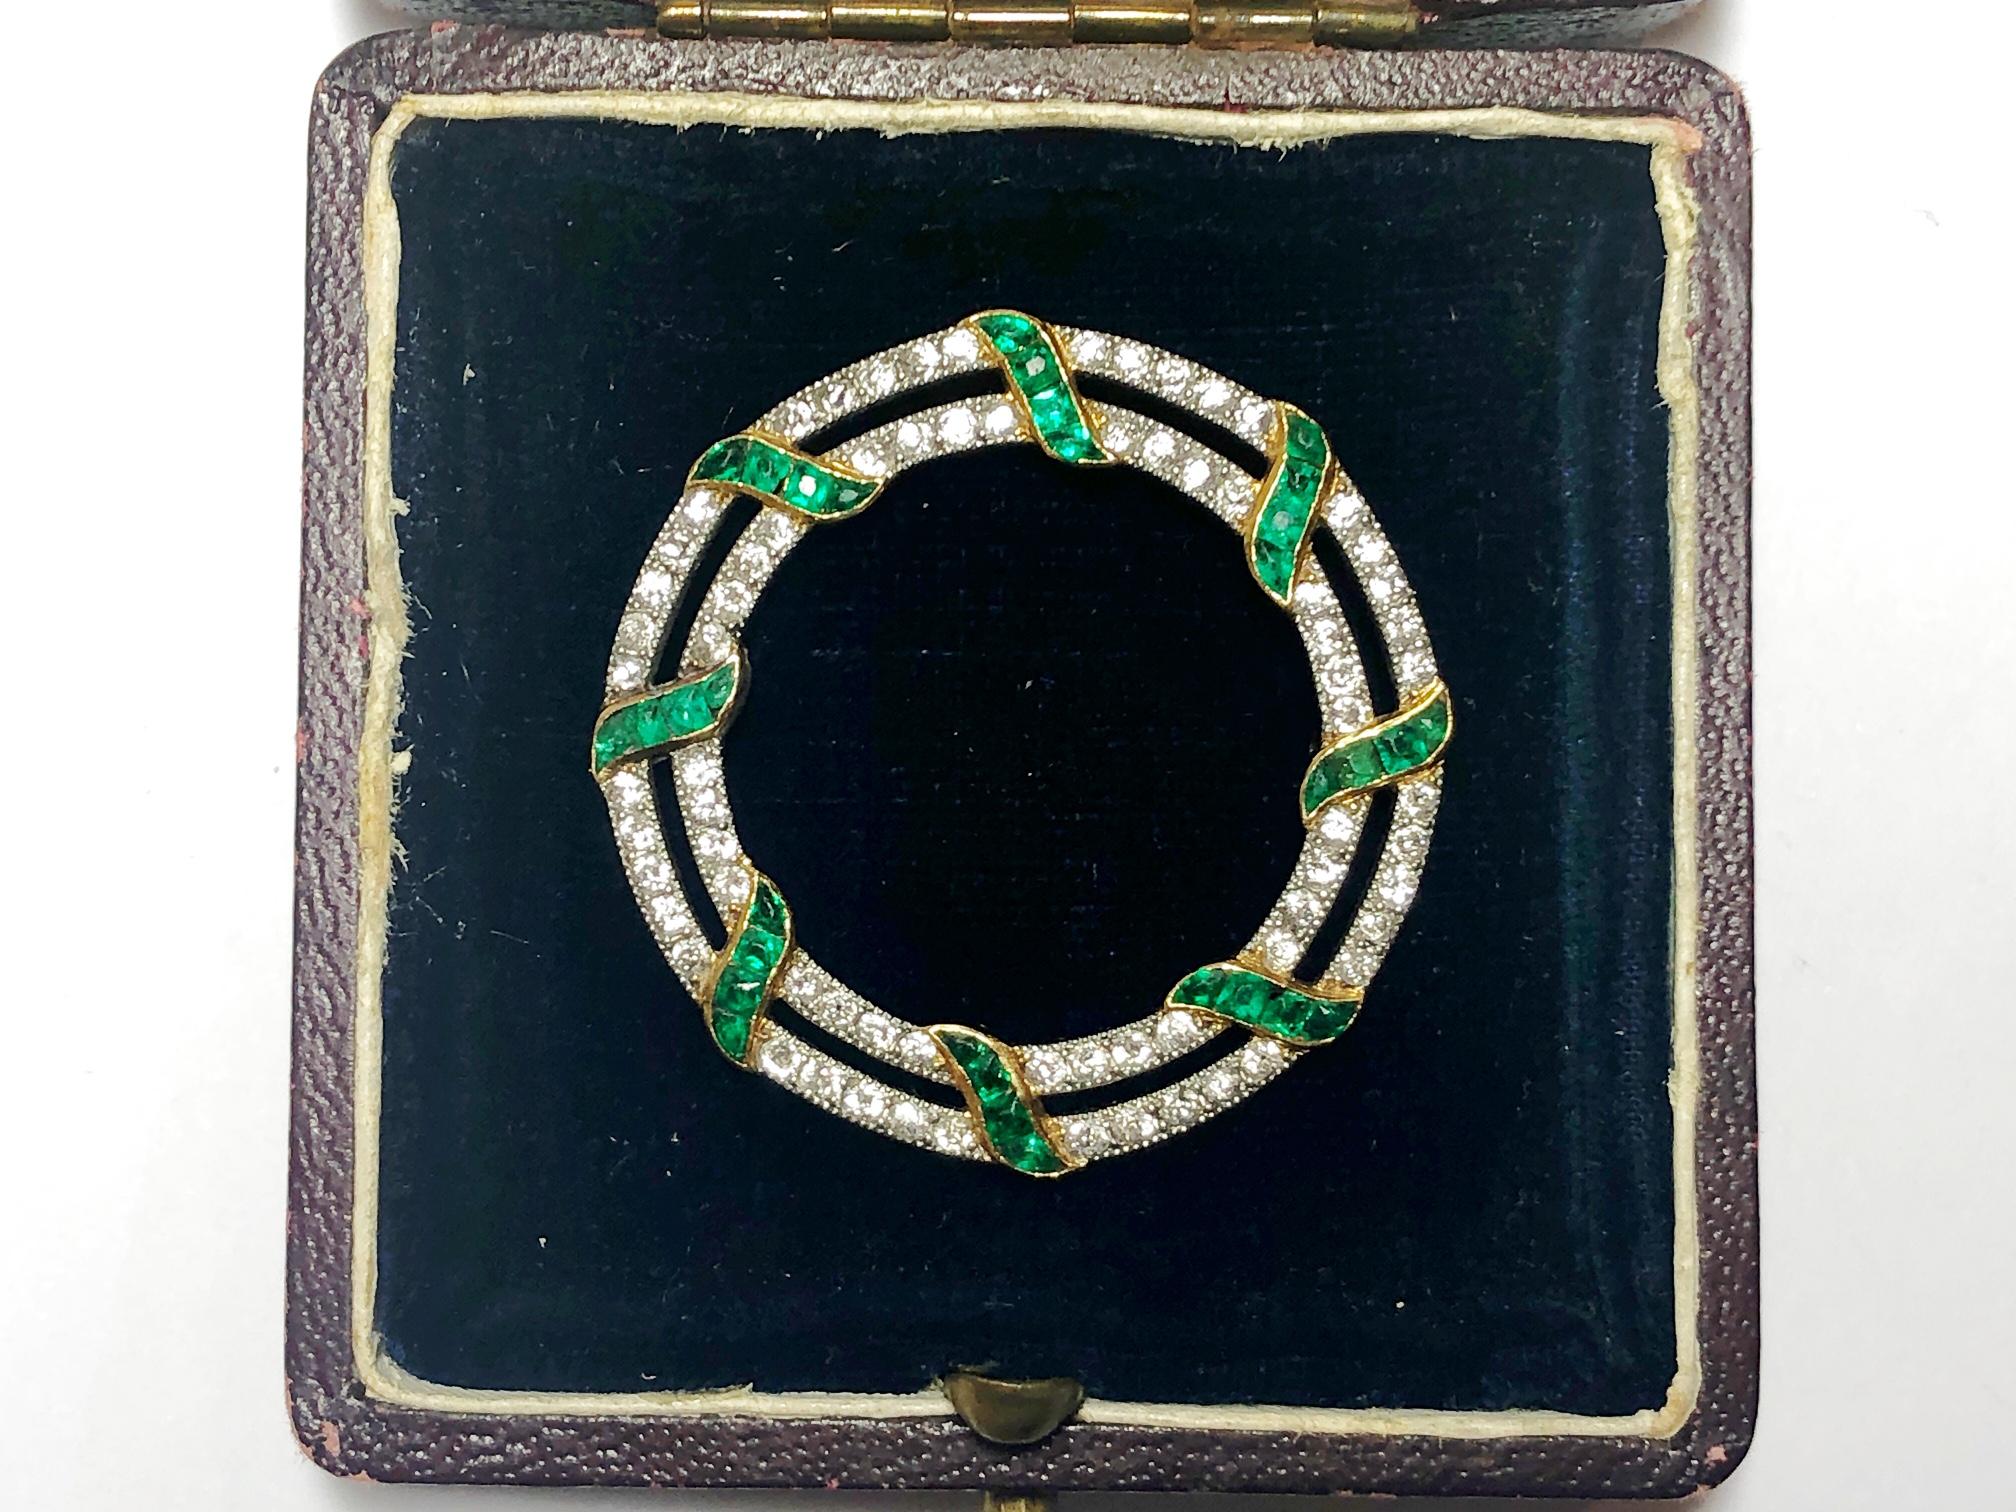 An Edwardian emerald and diamond circular brooch, double openwork circles set with old cit diamonds, mounted in platinum, with calibre cut emerald ribbon detail, in yellow gold, measures approximately 36mm diameter